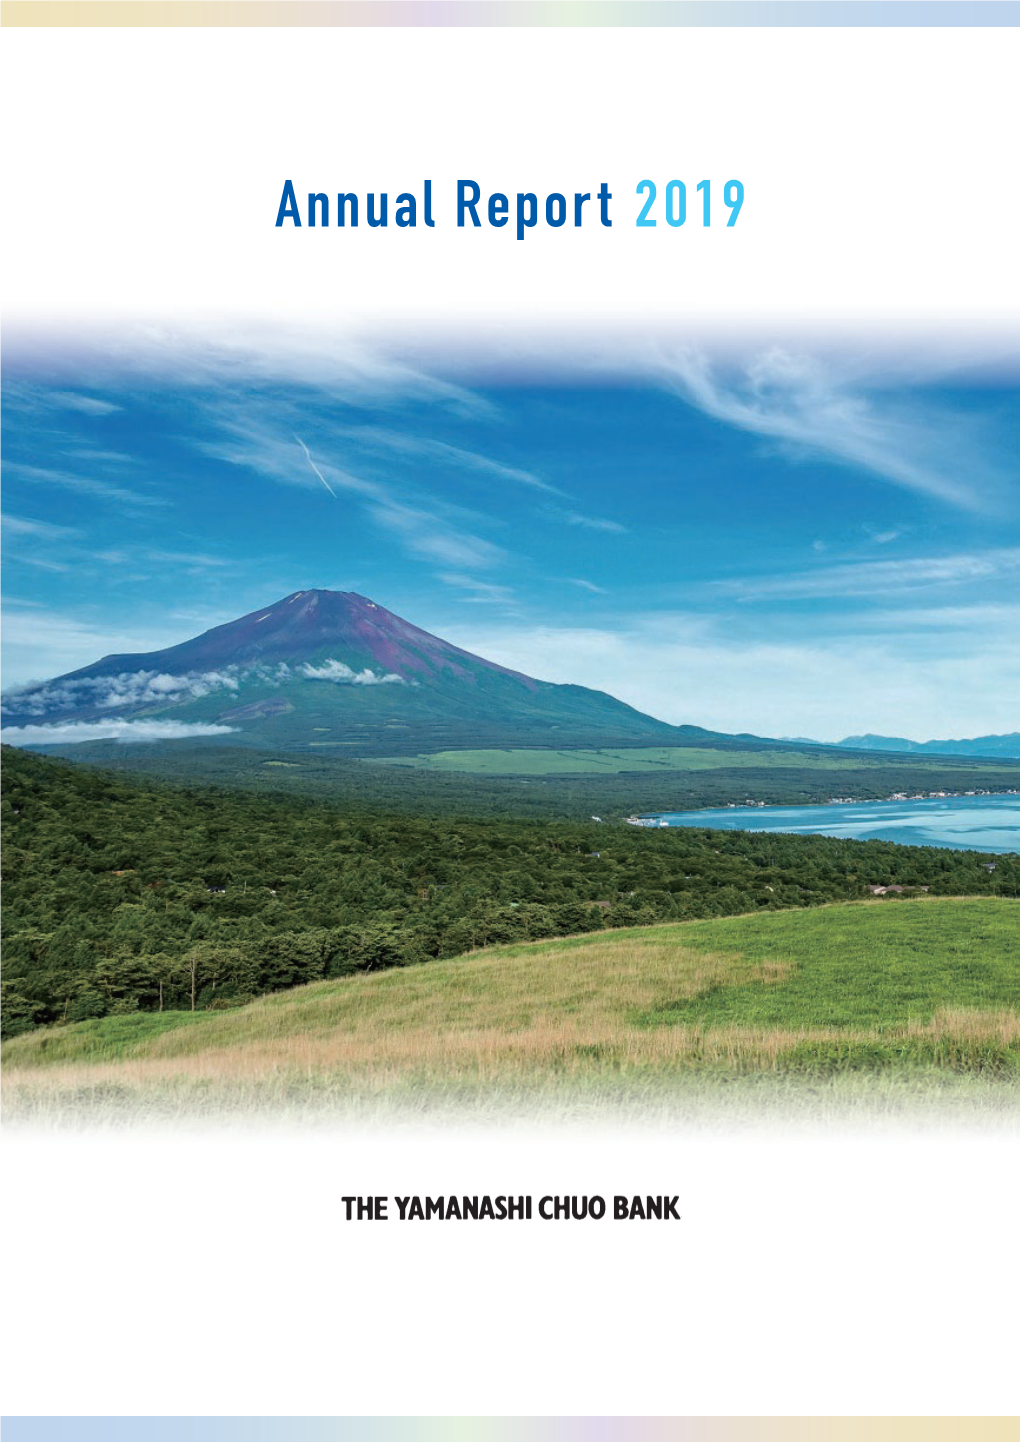 Annual Report 2019 Local Industries in Yamanashi Prefecture